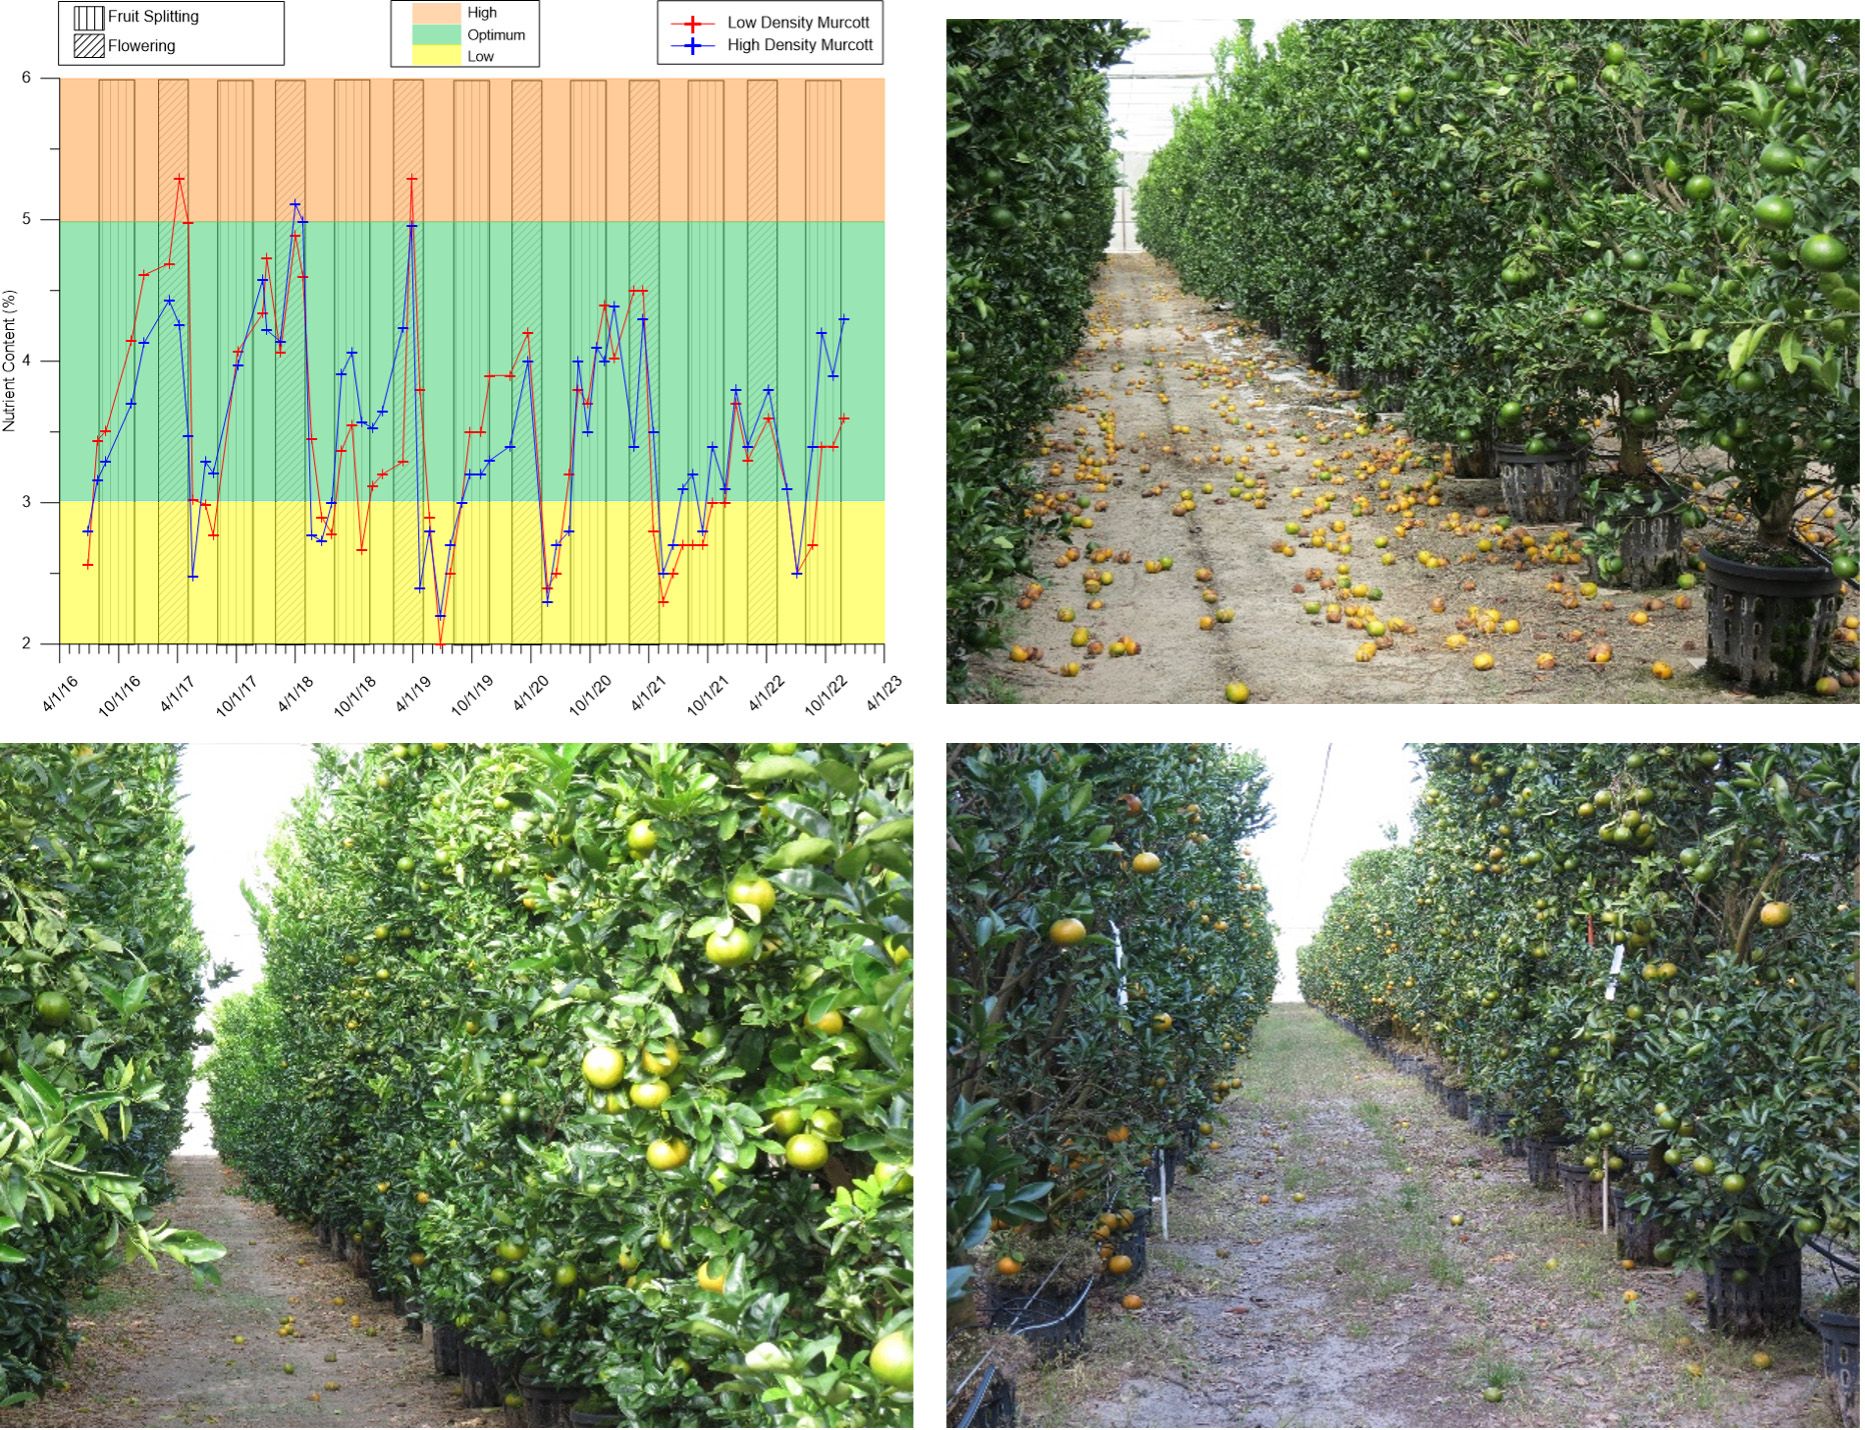 Seasonal fluctuation in leaf calcium levels in Honey Murcott in CREC-CUPS at two planting densities from 2016 to 2022 (top left), and images of fruit drop from PFS in 2017 (lower left), 2019 (top right), and 2022 (bottom right).